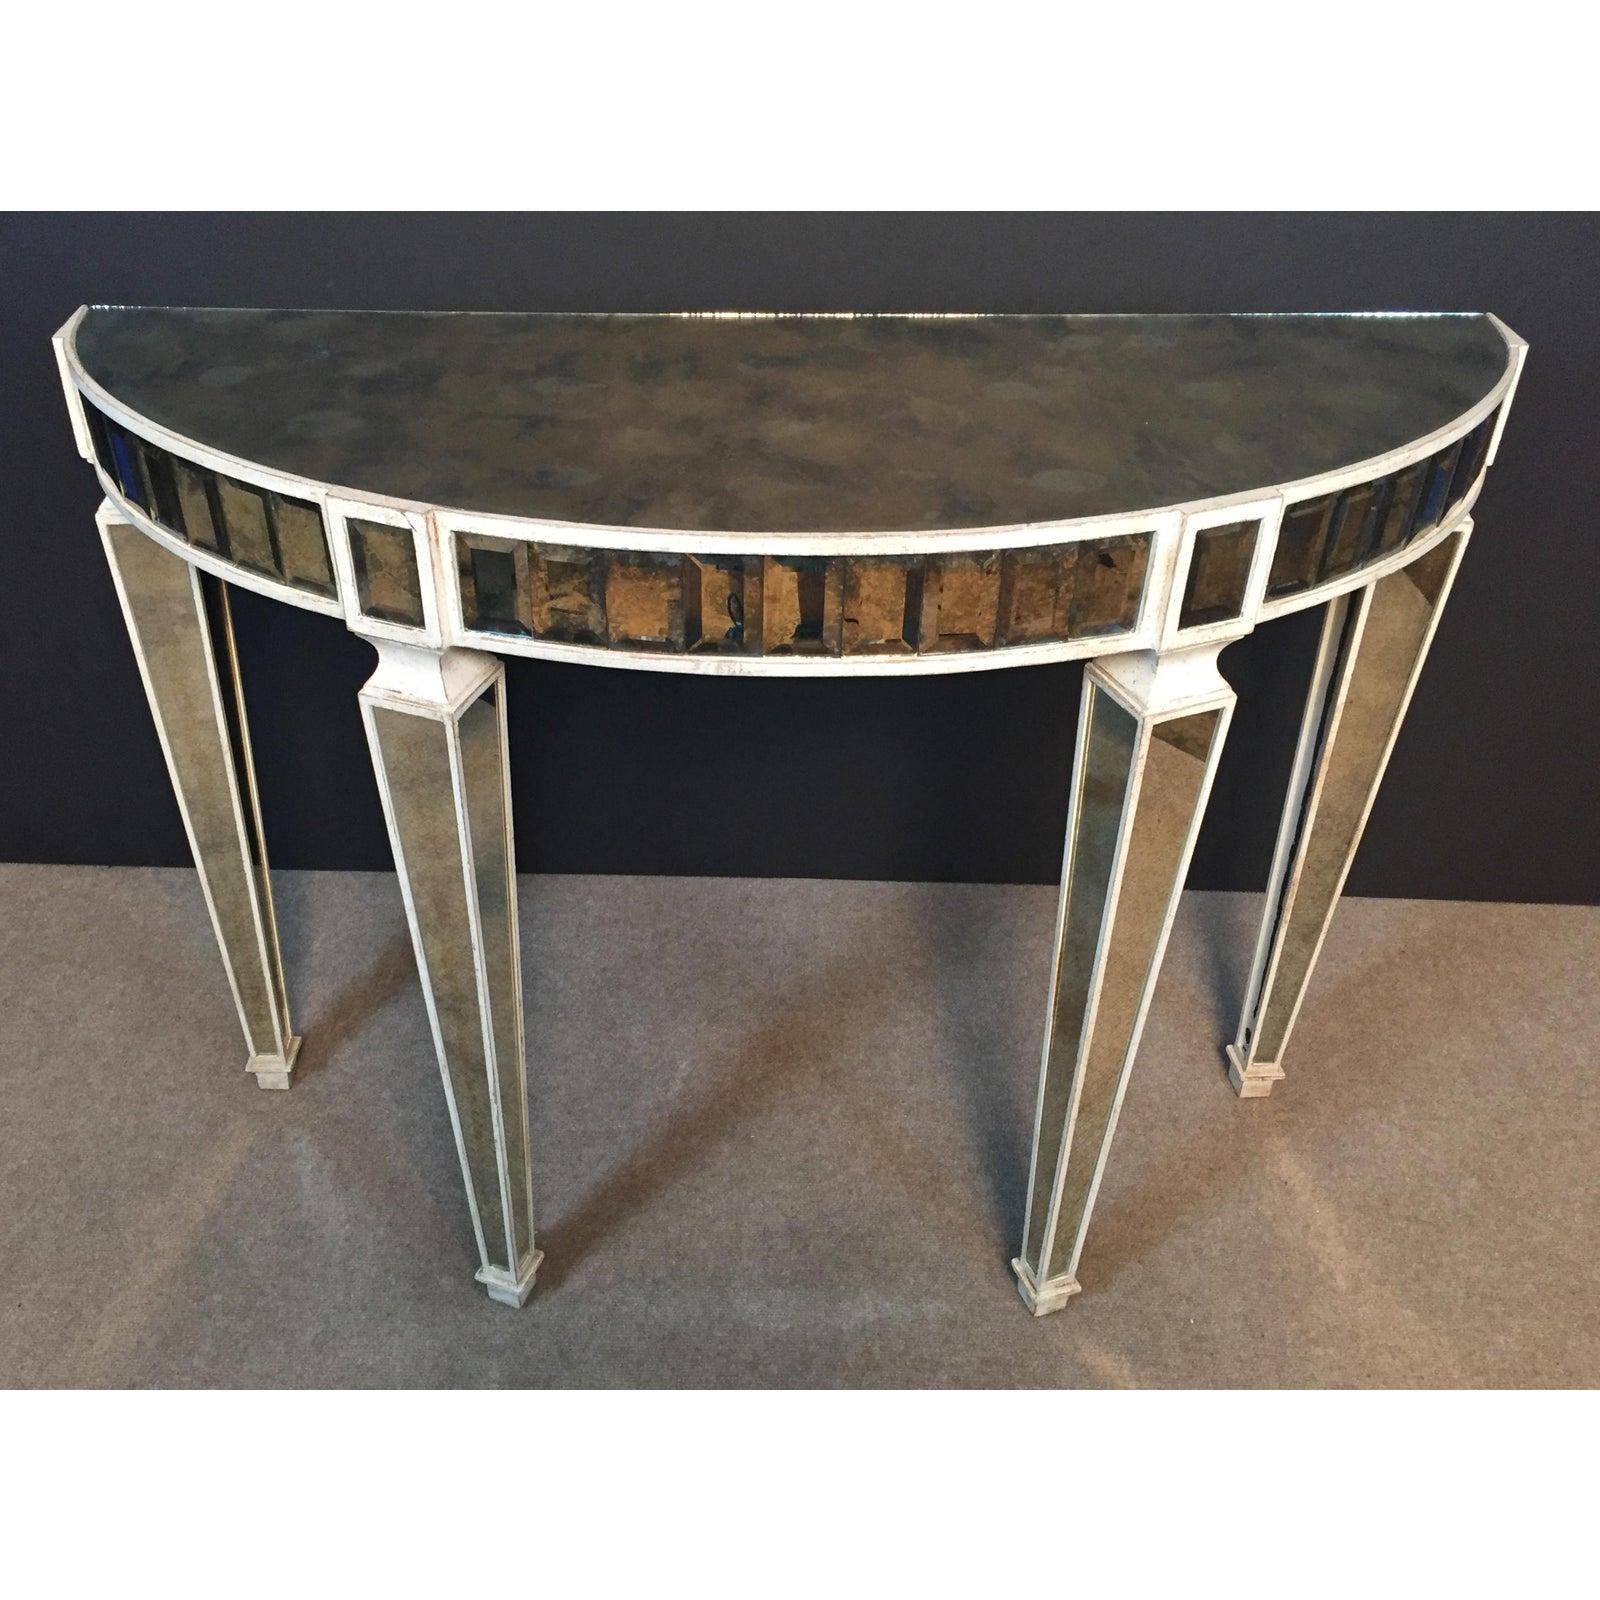 Amy Howard Demi-lune Console table. Beveled glass mirrored jeweled gallery. All mirrors have an old world antique look. Makers plaque mounted on back